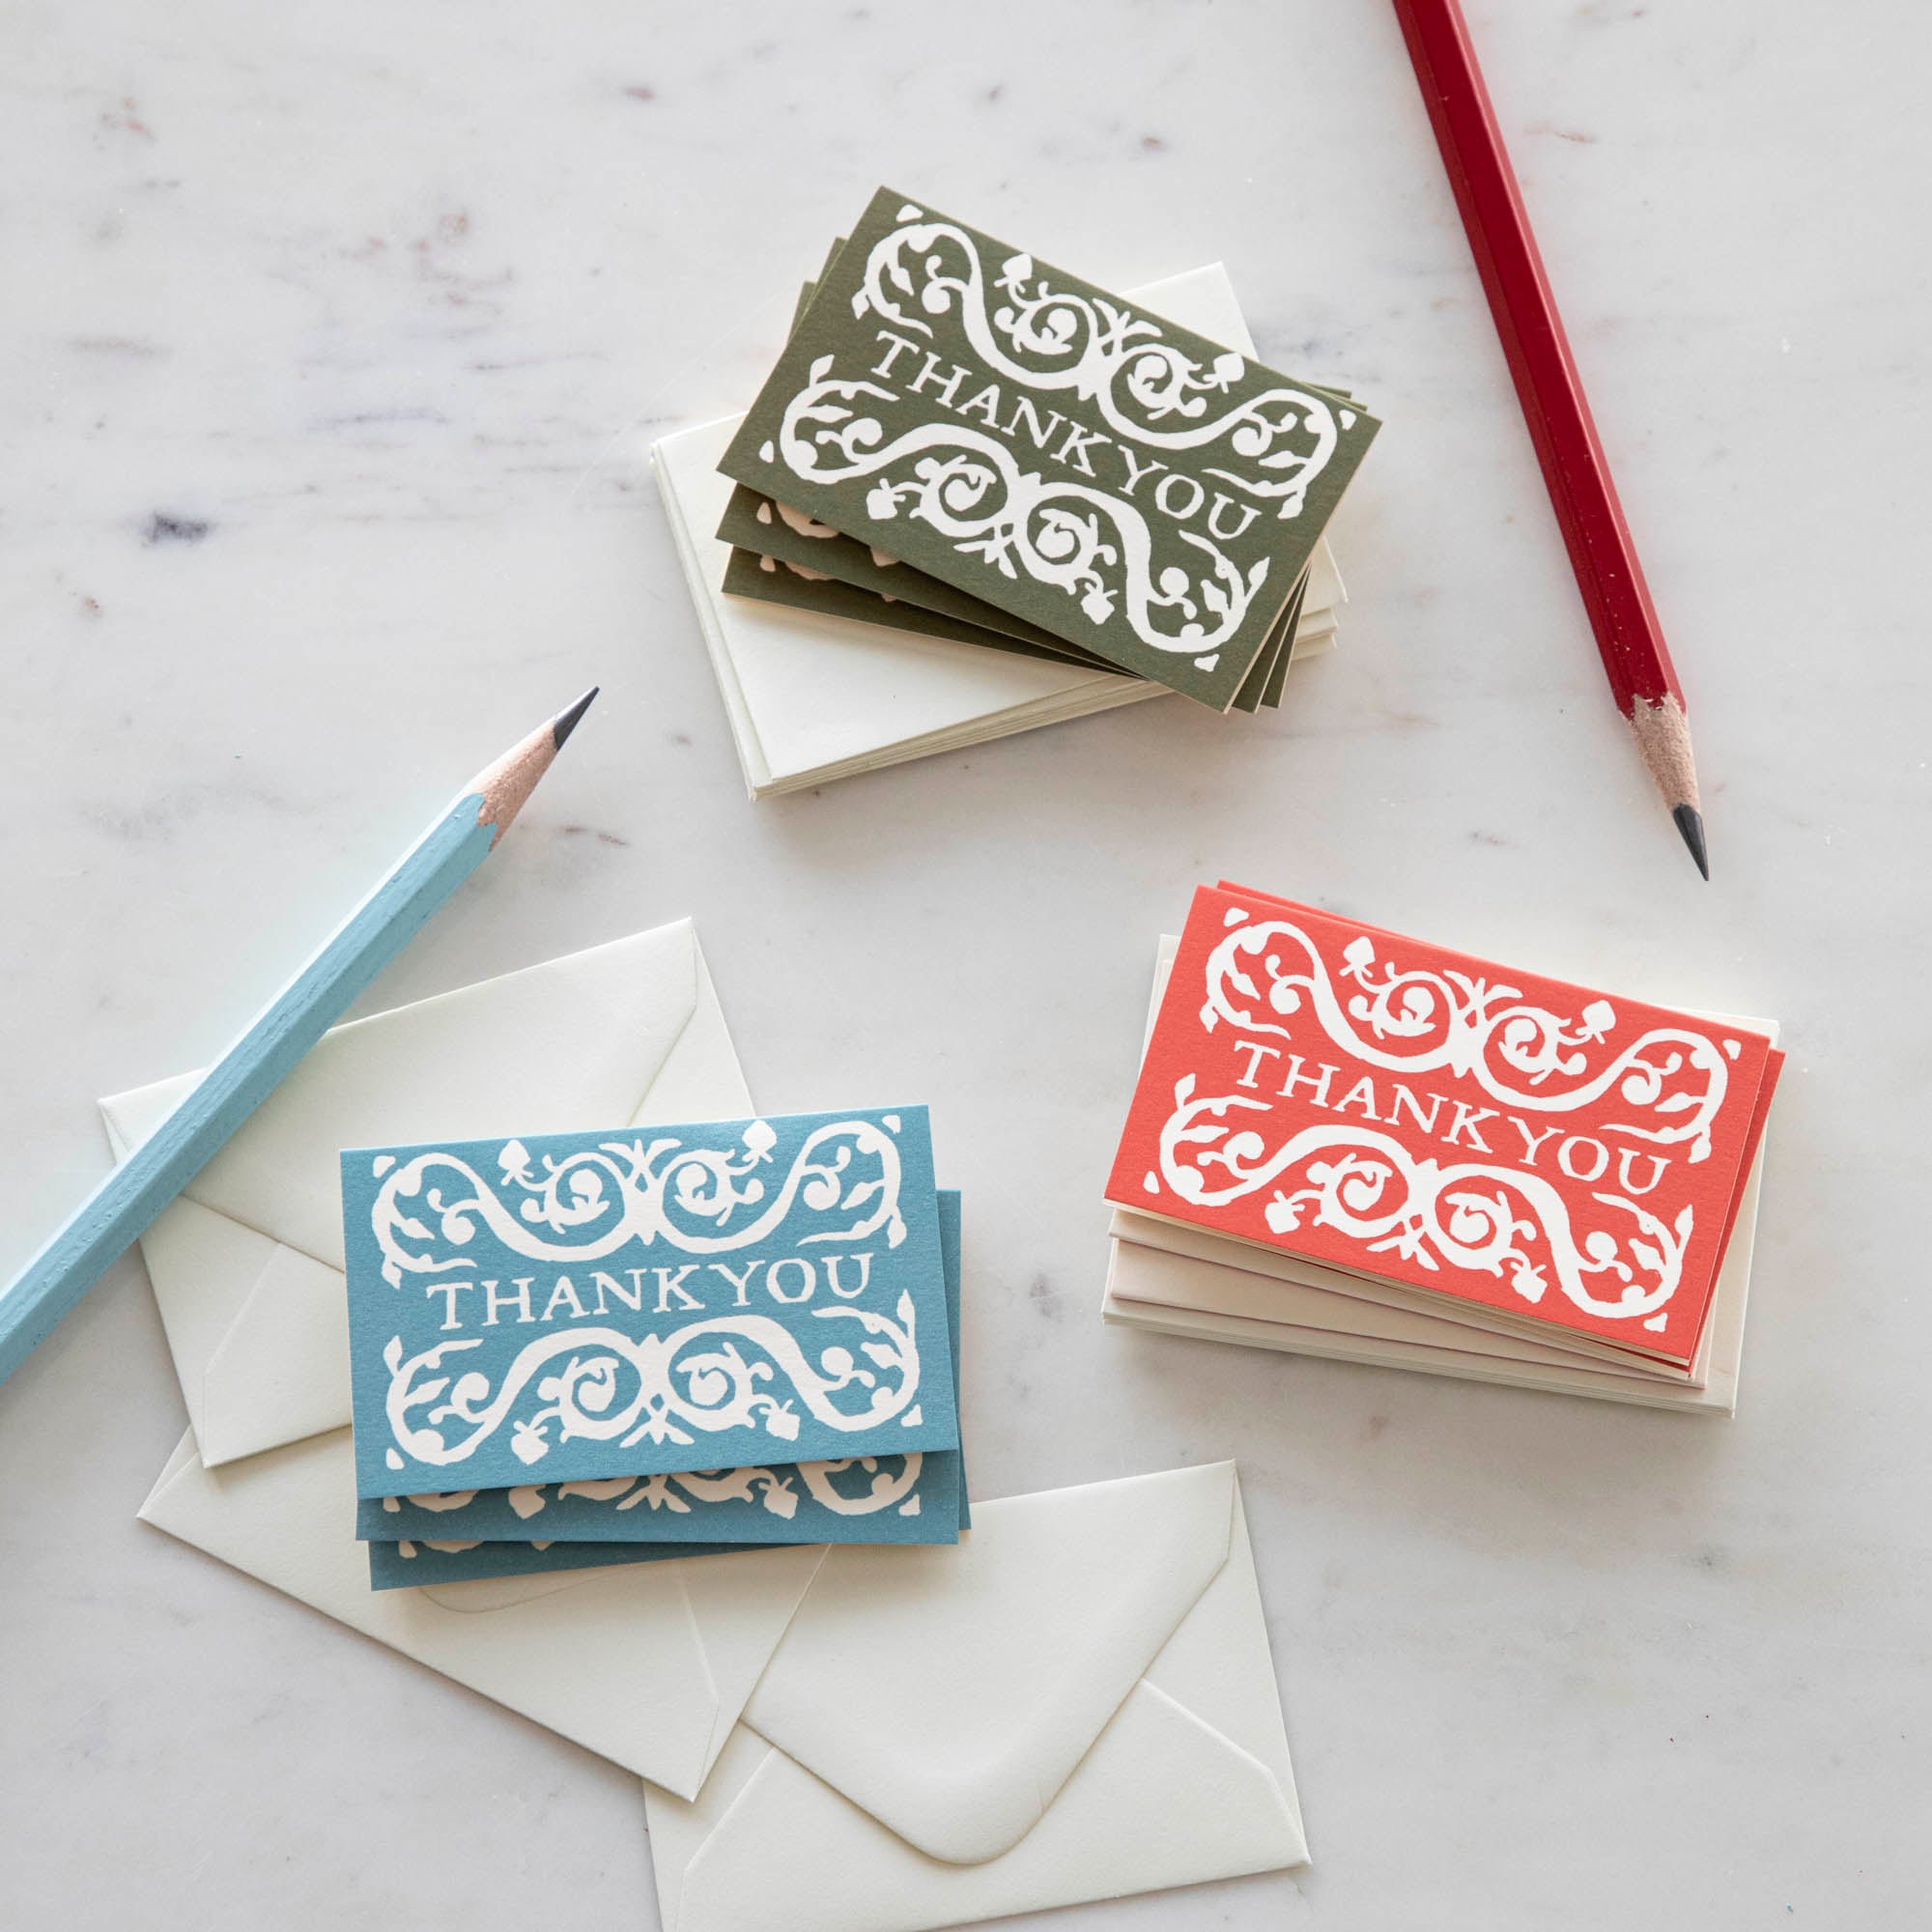 A selection of Cambridge Imprint Arabesque Thank You Cards with intricate designs next to two pencils, crafted on FSC-certified stock.